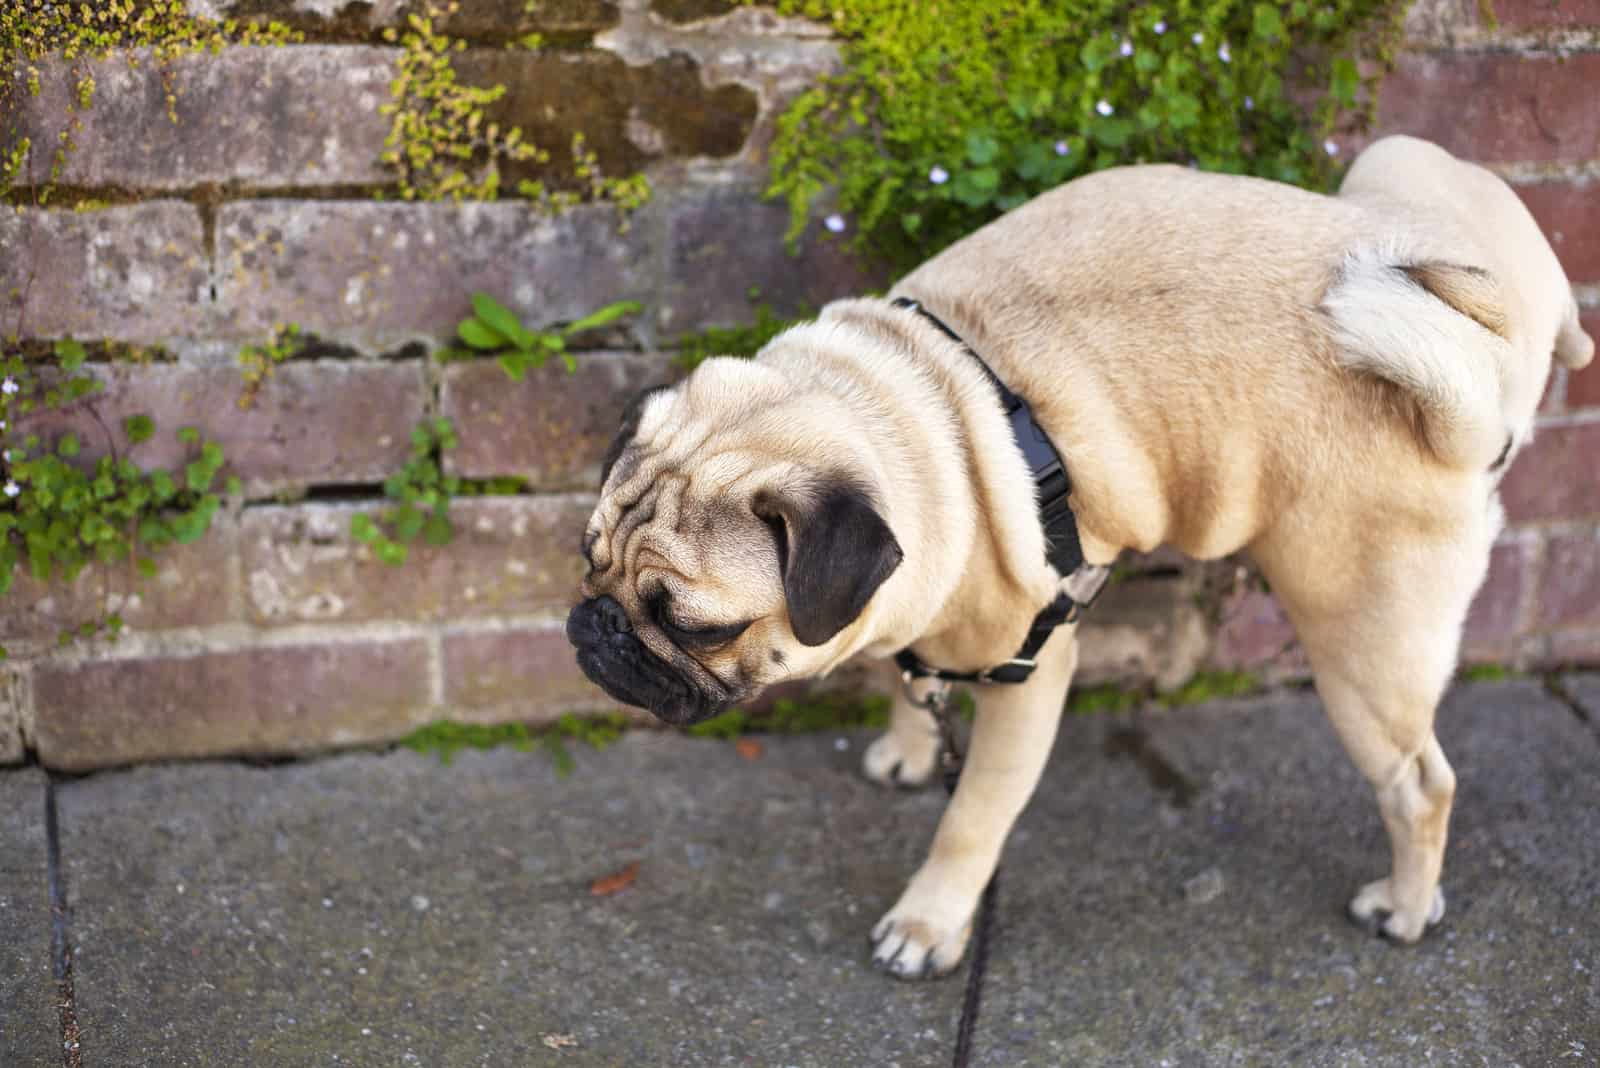 Male pug dog is pissing on the wall of red bricks